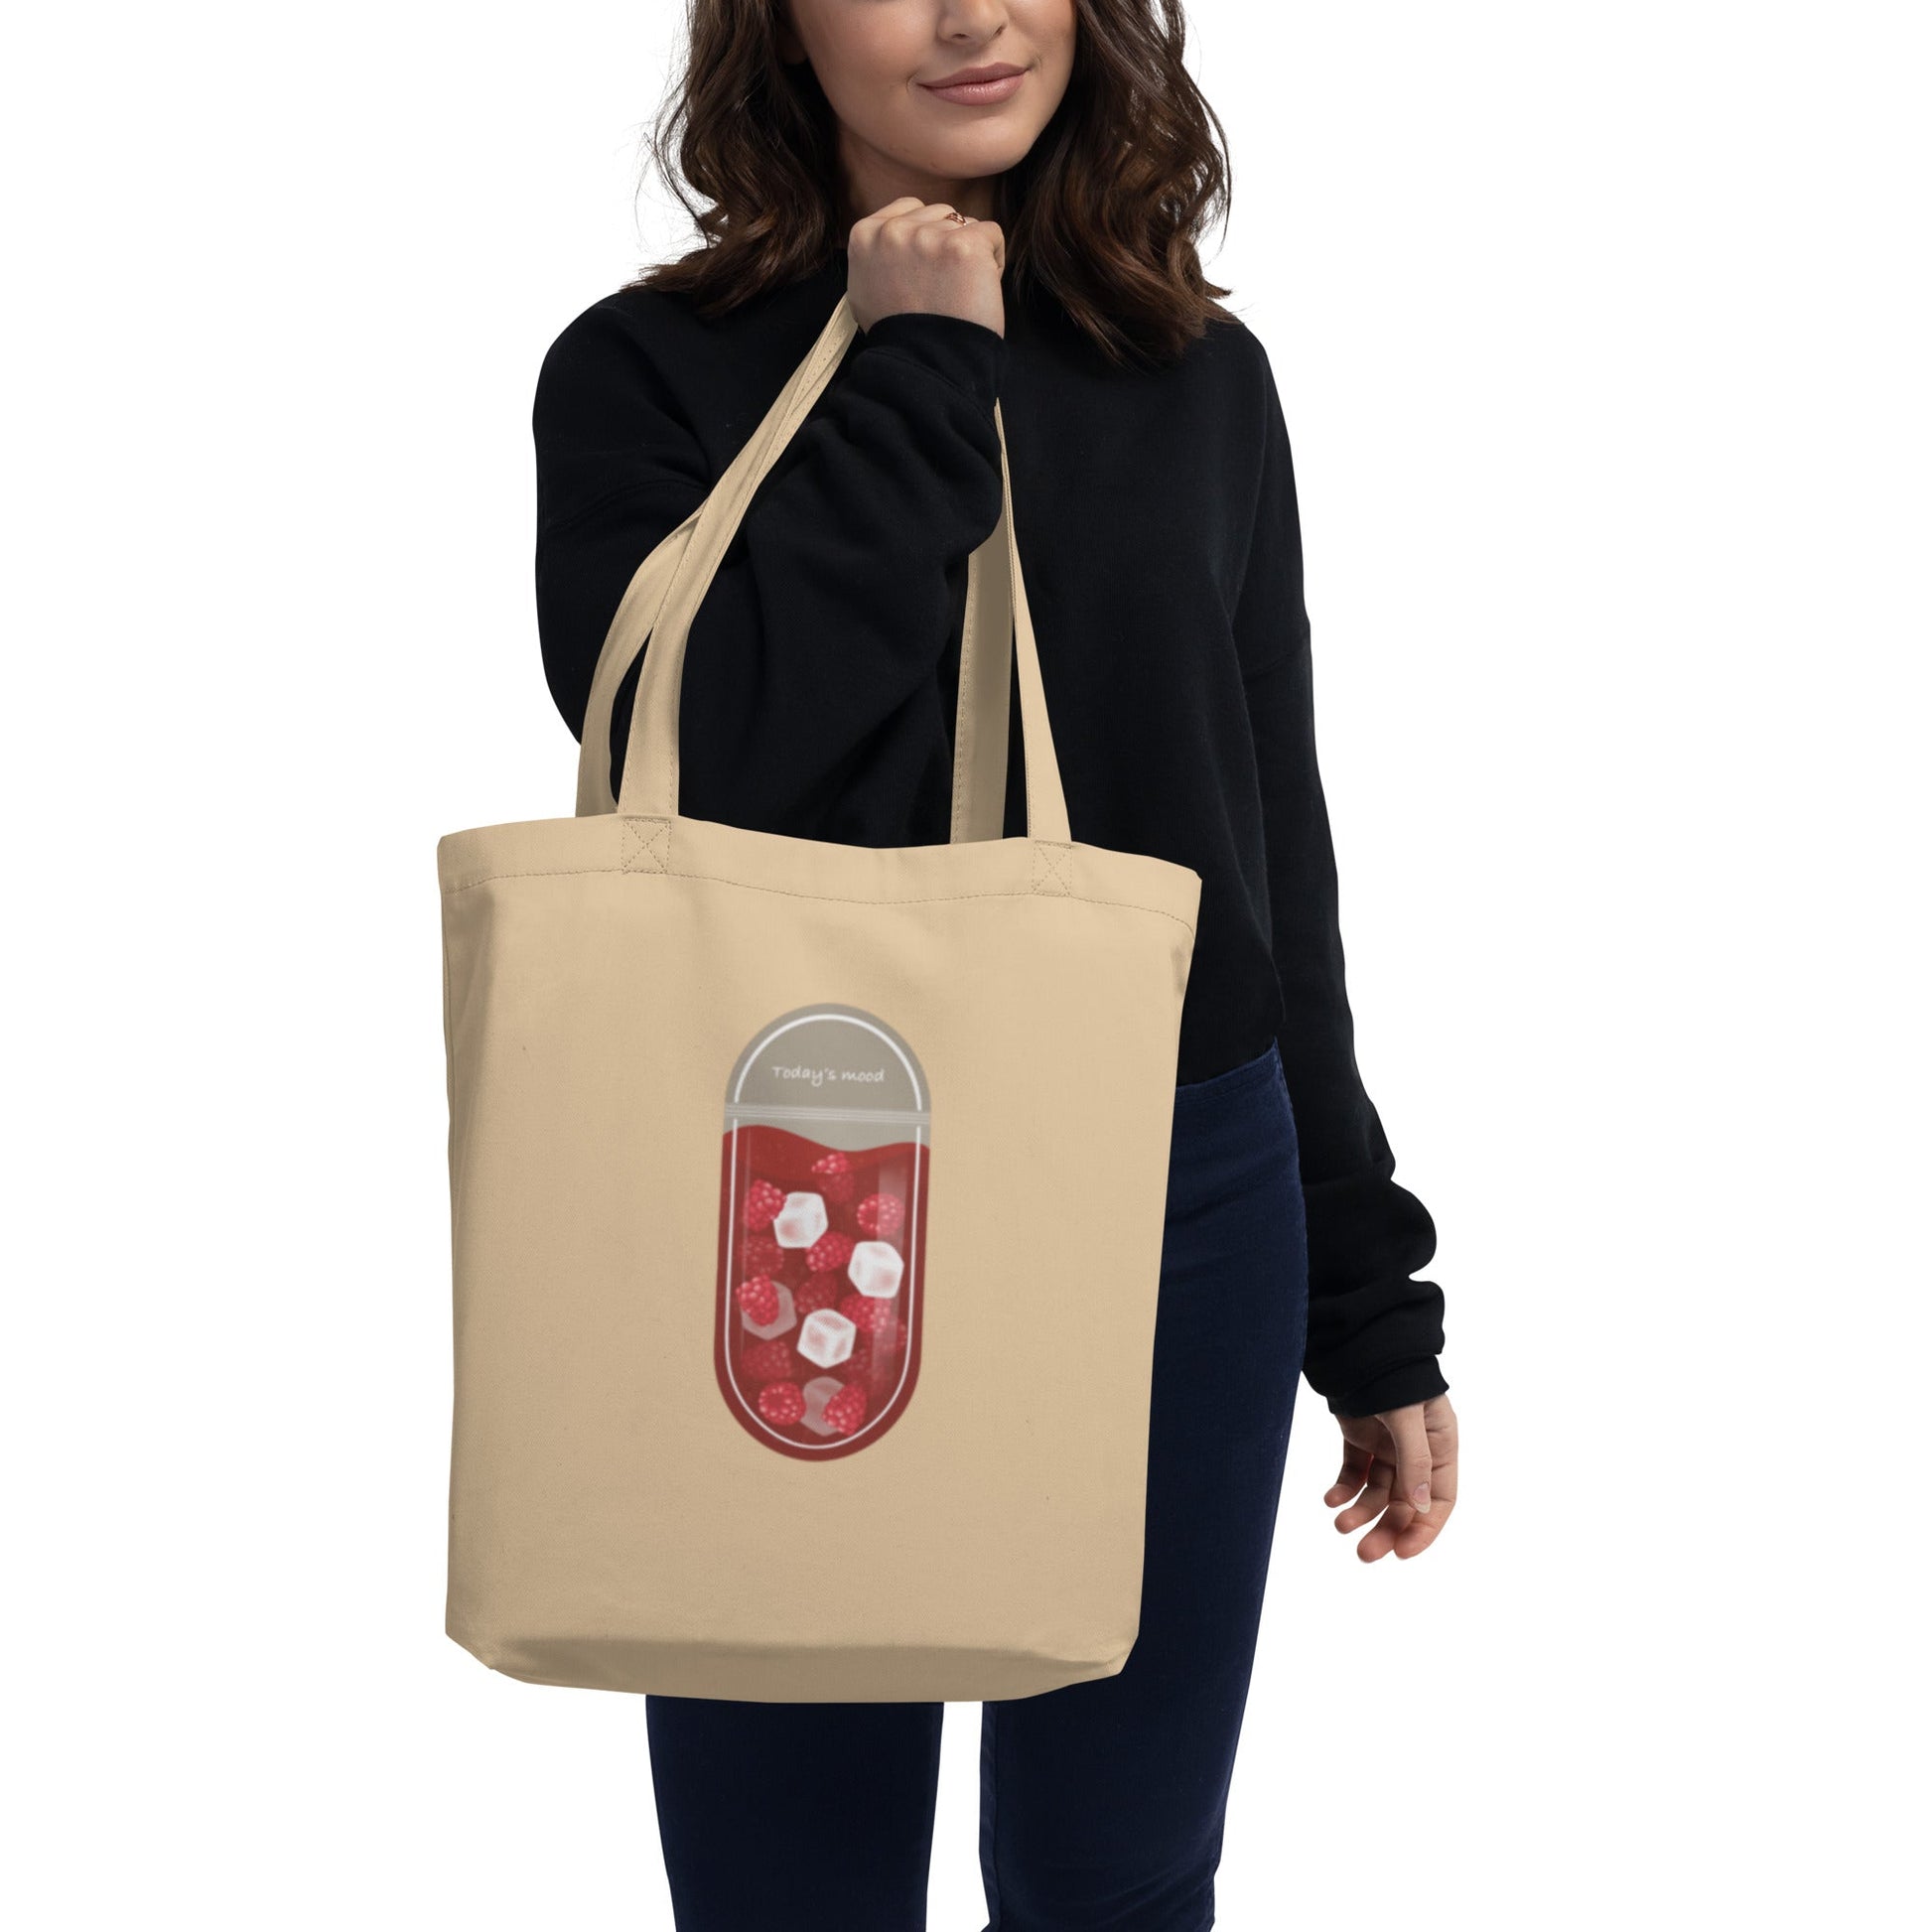 eco-tote-bag-todays-mood-3-oyster